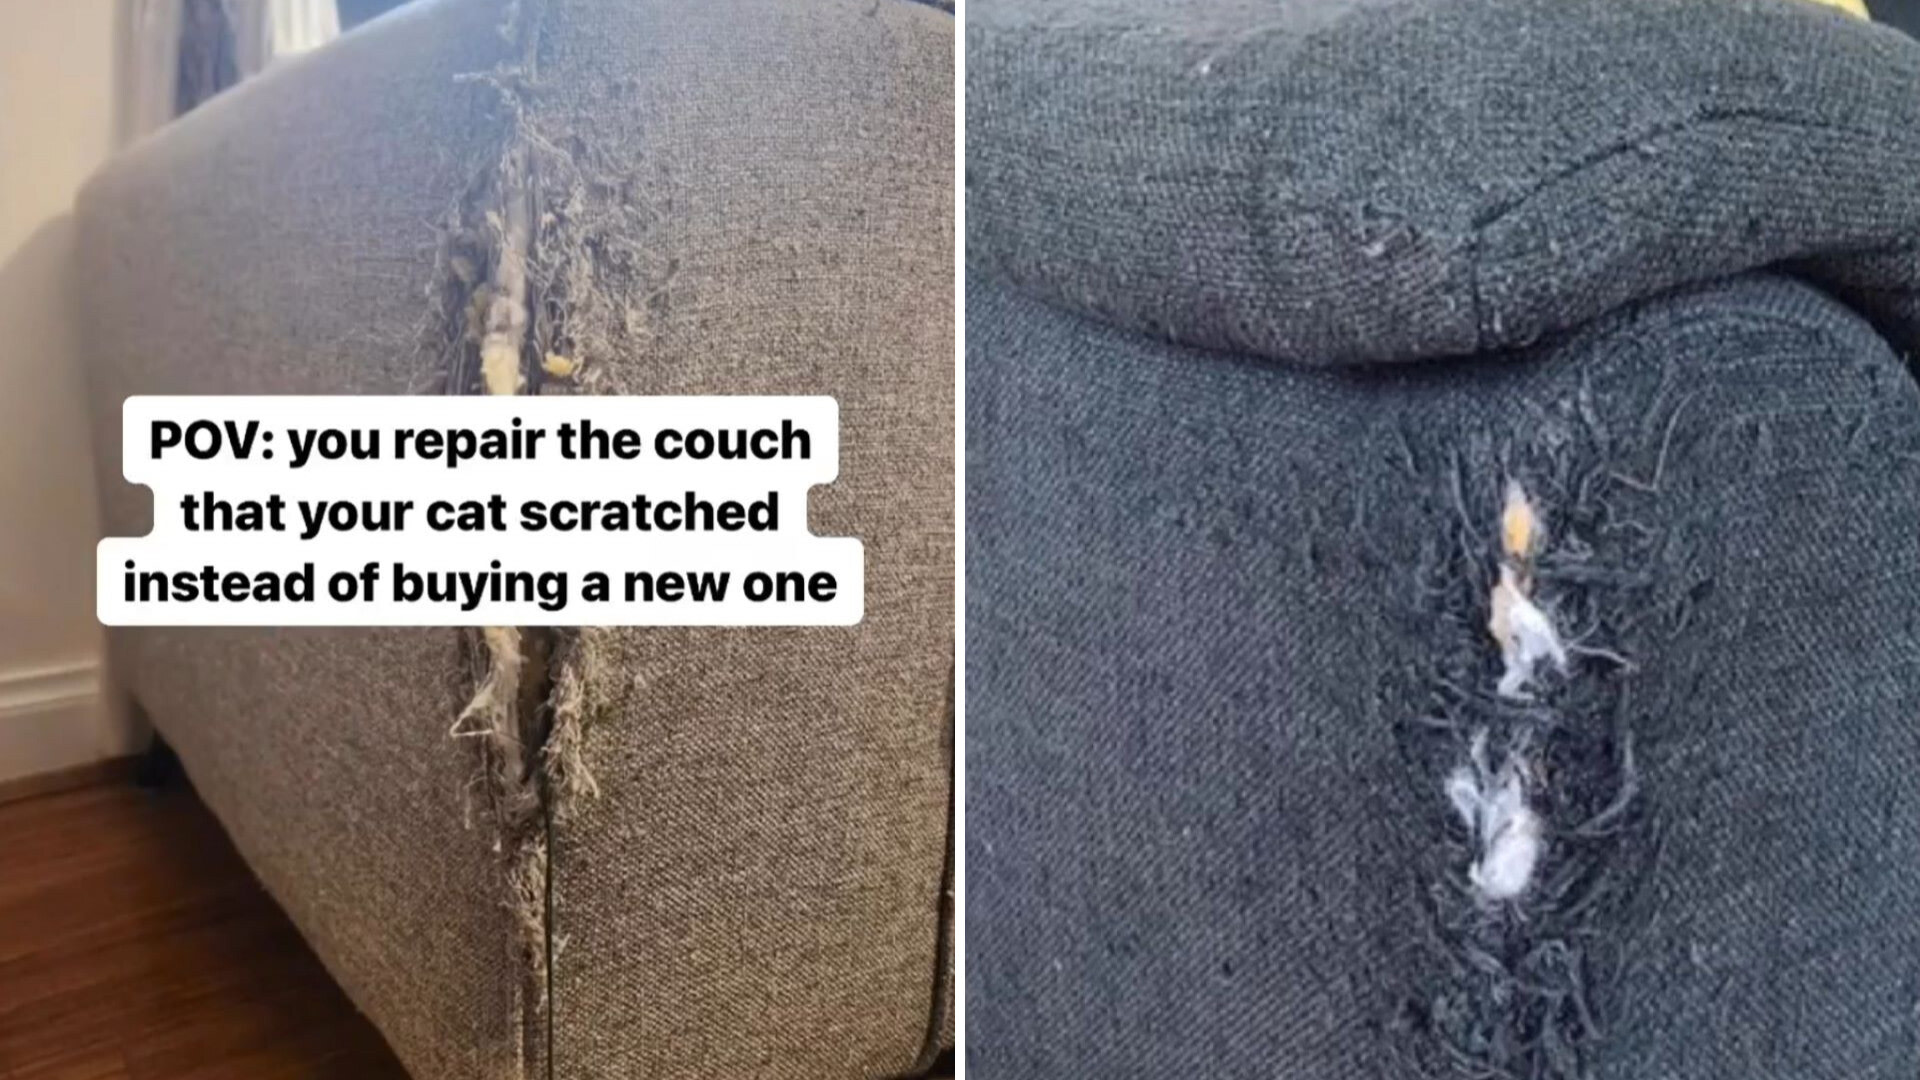 How to fix a couch damaged by a cat. : r/Unexpected